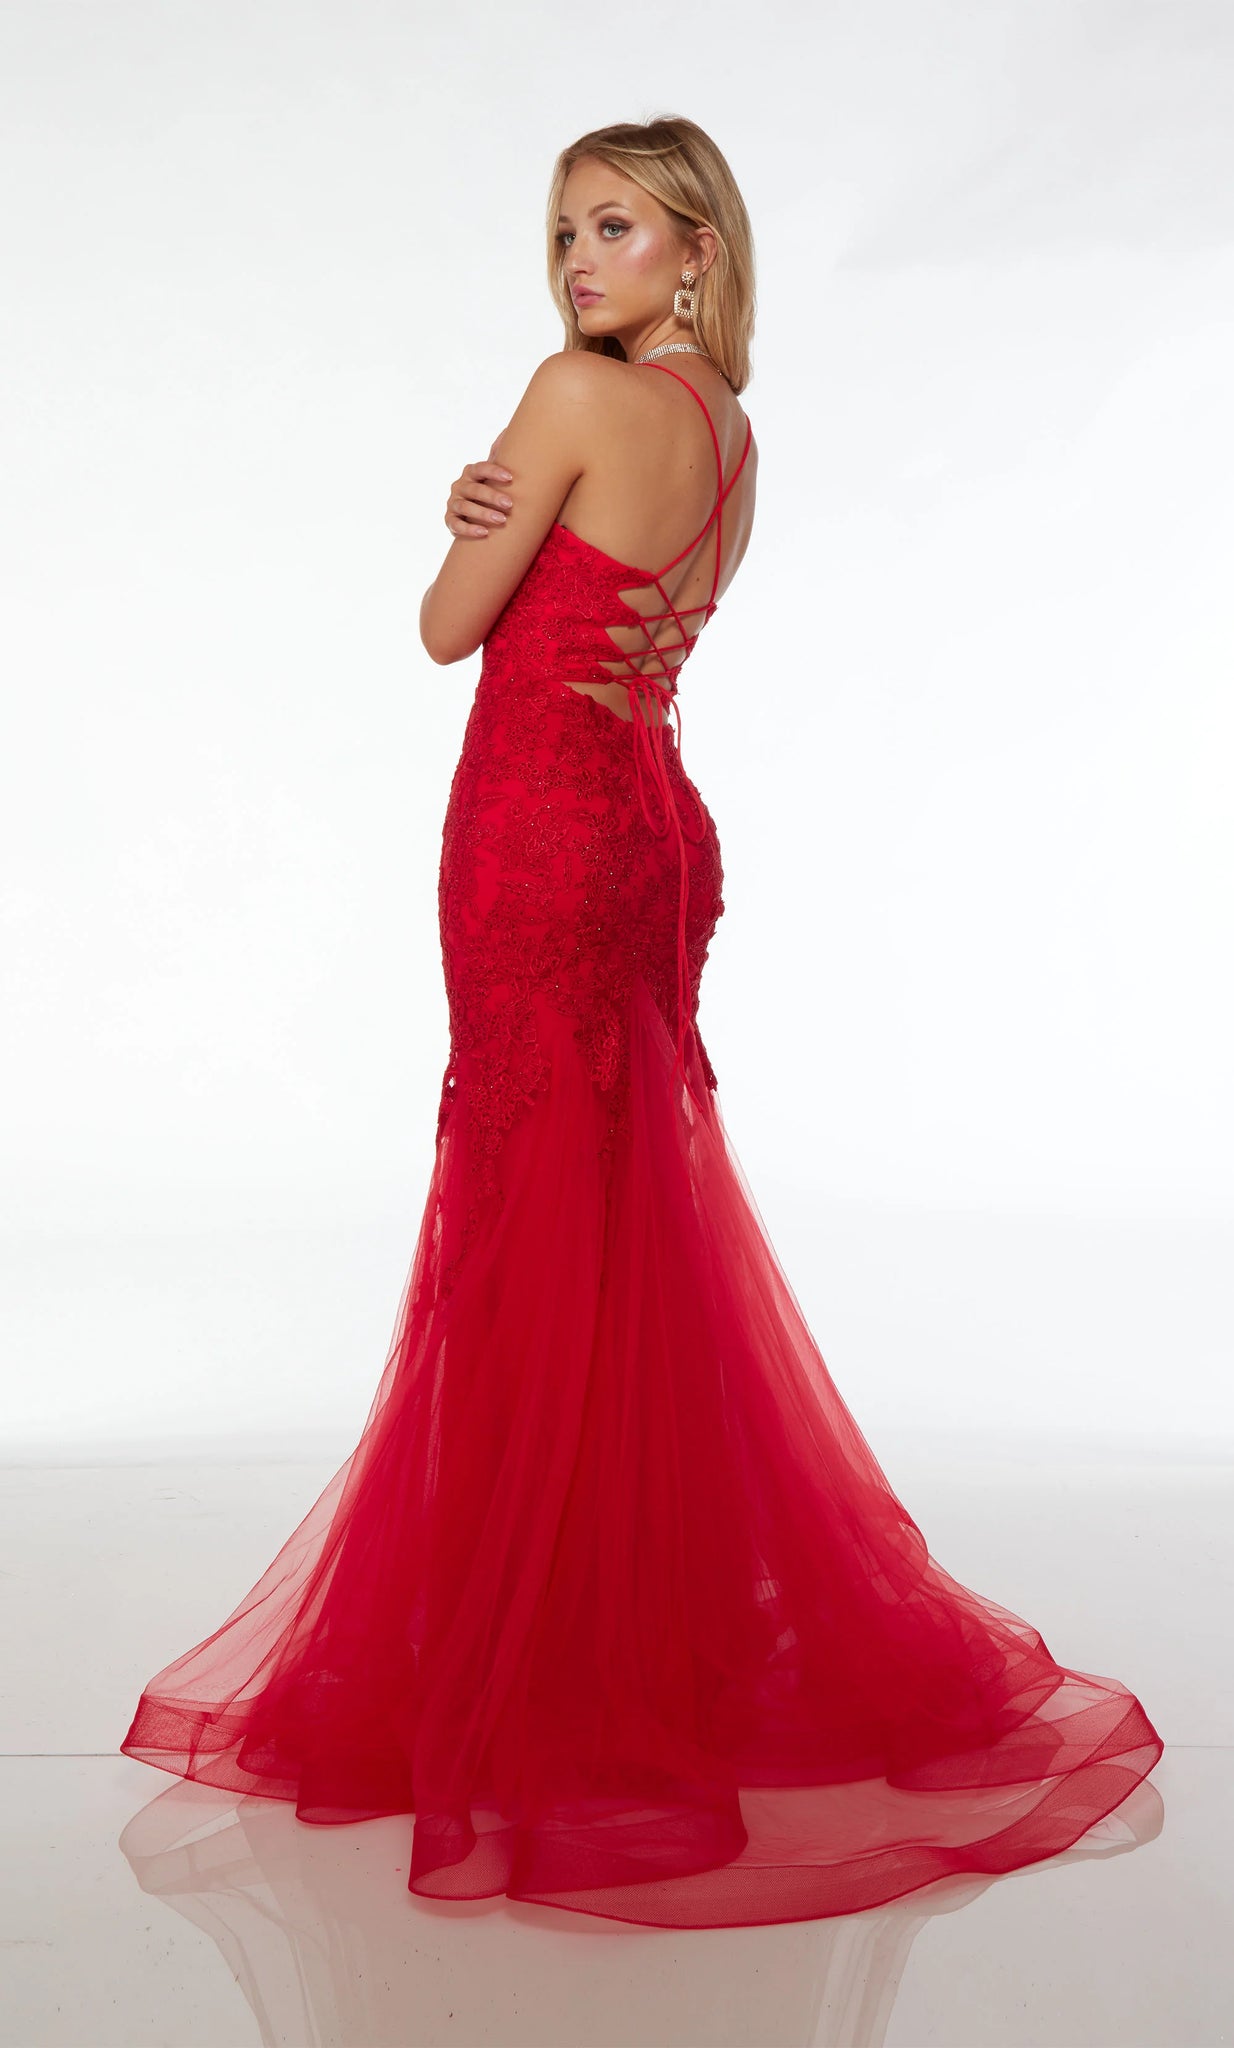 Red carpet ready, this ravishing Alyce Paris mermaid dress 61478 is an ideal choice for your senior prom. Showcasing a plunging v neckline, a sheer insert panel and dainty thin straps give this dress a sense of comfort and style. Glamorous beaded lace adorns this fascinating gown for the perfect pop of glitz. Made in a playful tulle fabric, the mermaid silhouette defines your curves, while the lace up closure accentuates your natural hourglass silhouette.